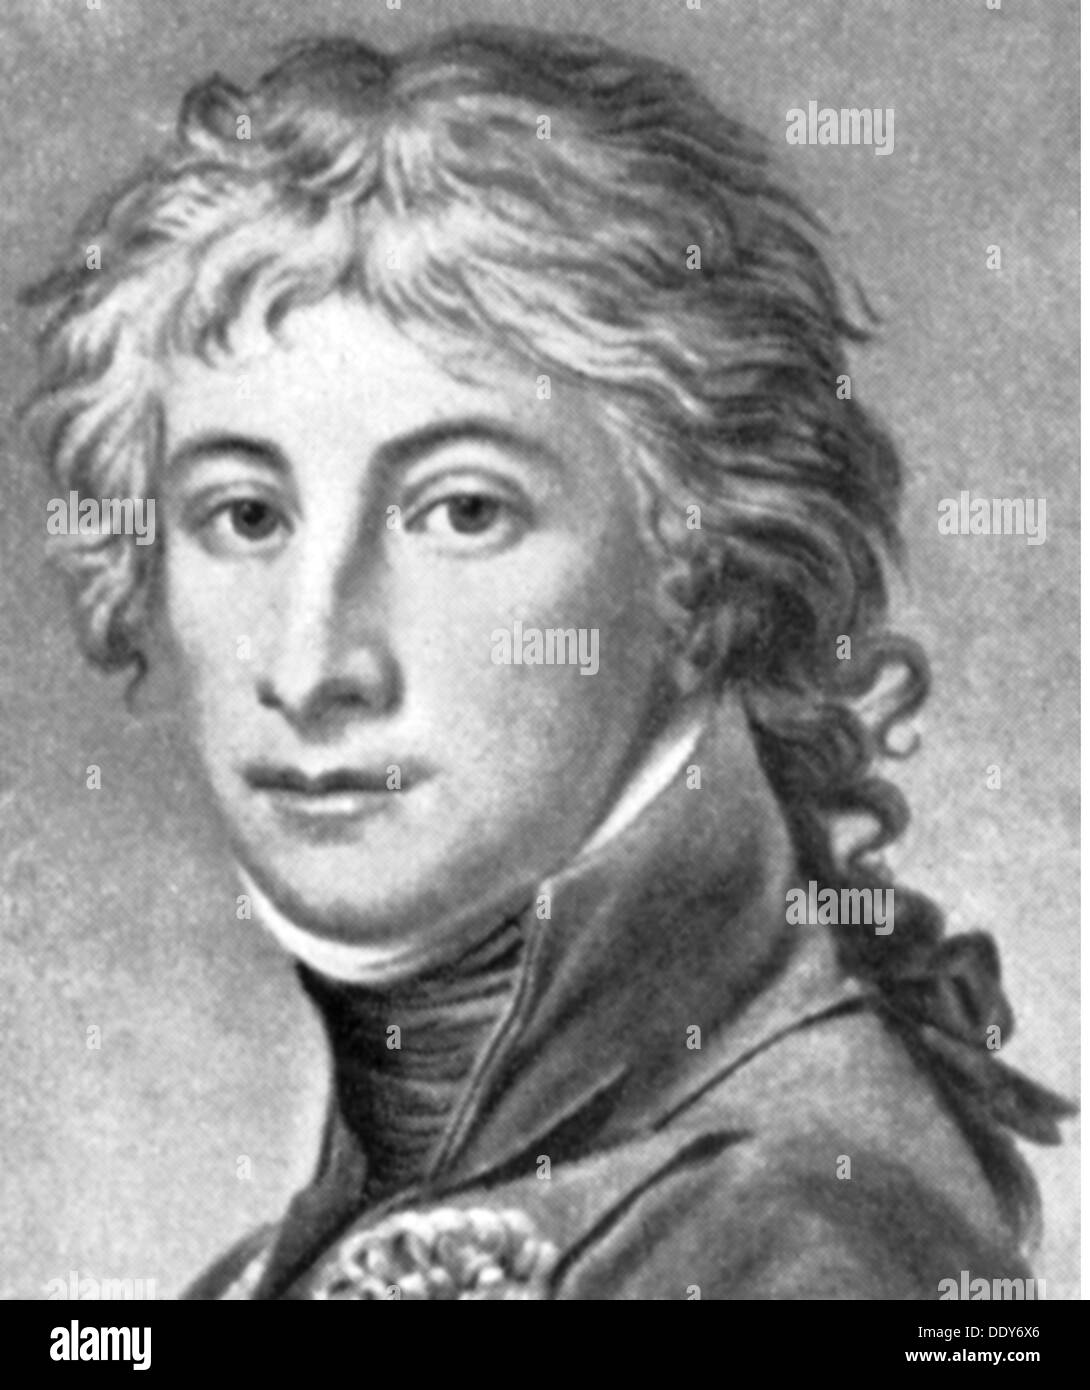 Louis Ferdinand, 18.11.1772 - 10.10.1806, prince of Prussia, Prussian general, portrait, drawing, from: 'Grosser Brockhaus', circa 1900, Stock Photo